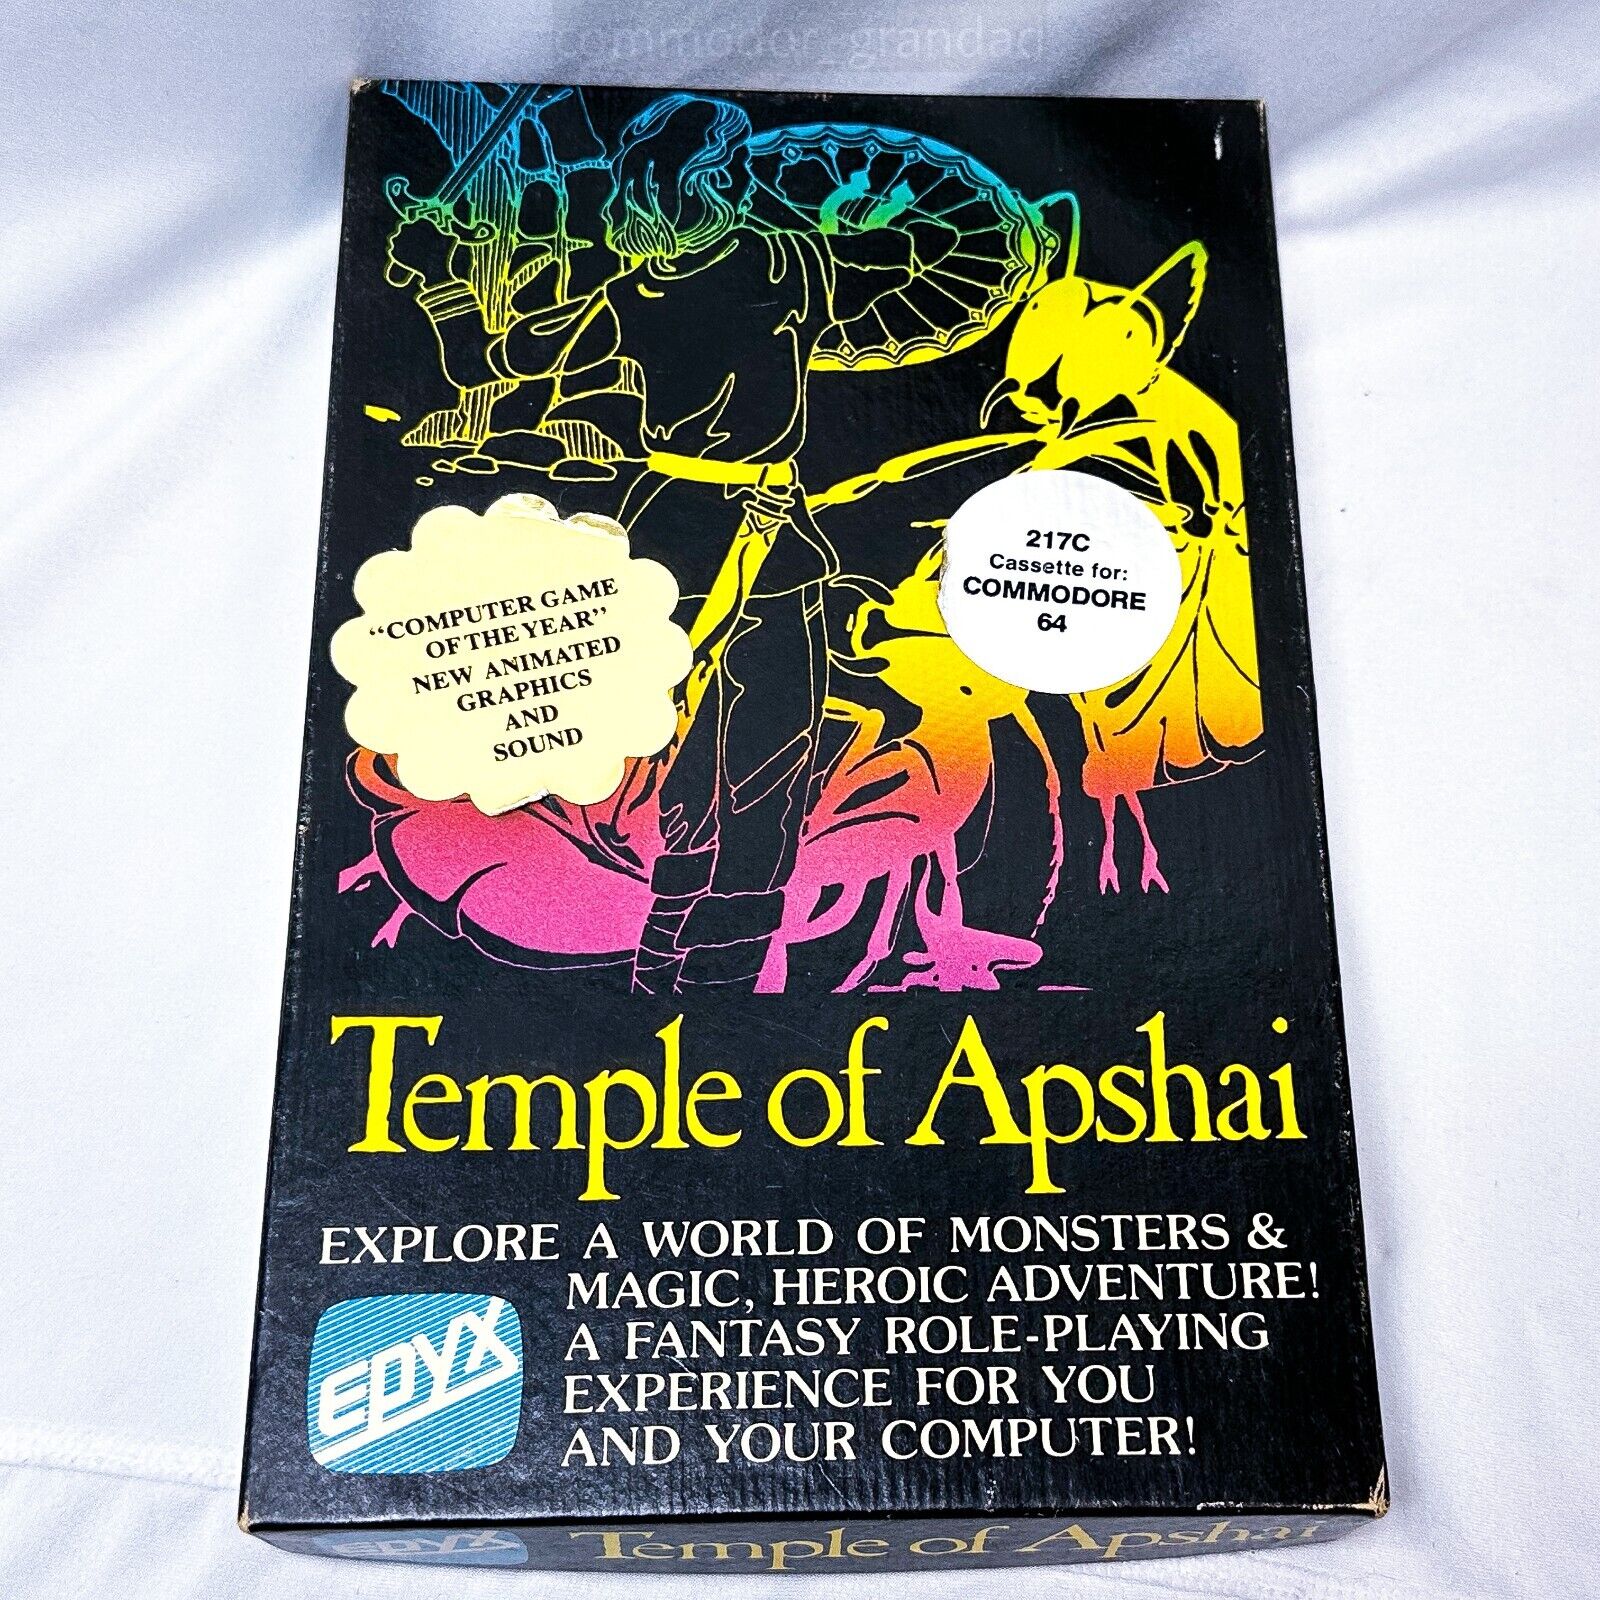 Vintage Dunjonquest - Temple of Apshai 217C Video Game Cassette for Commodore 64